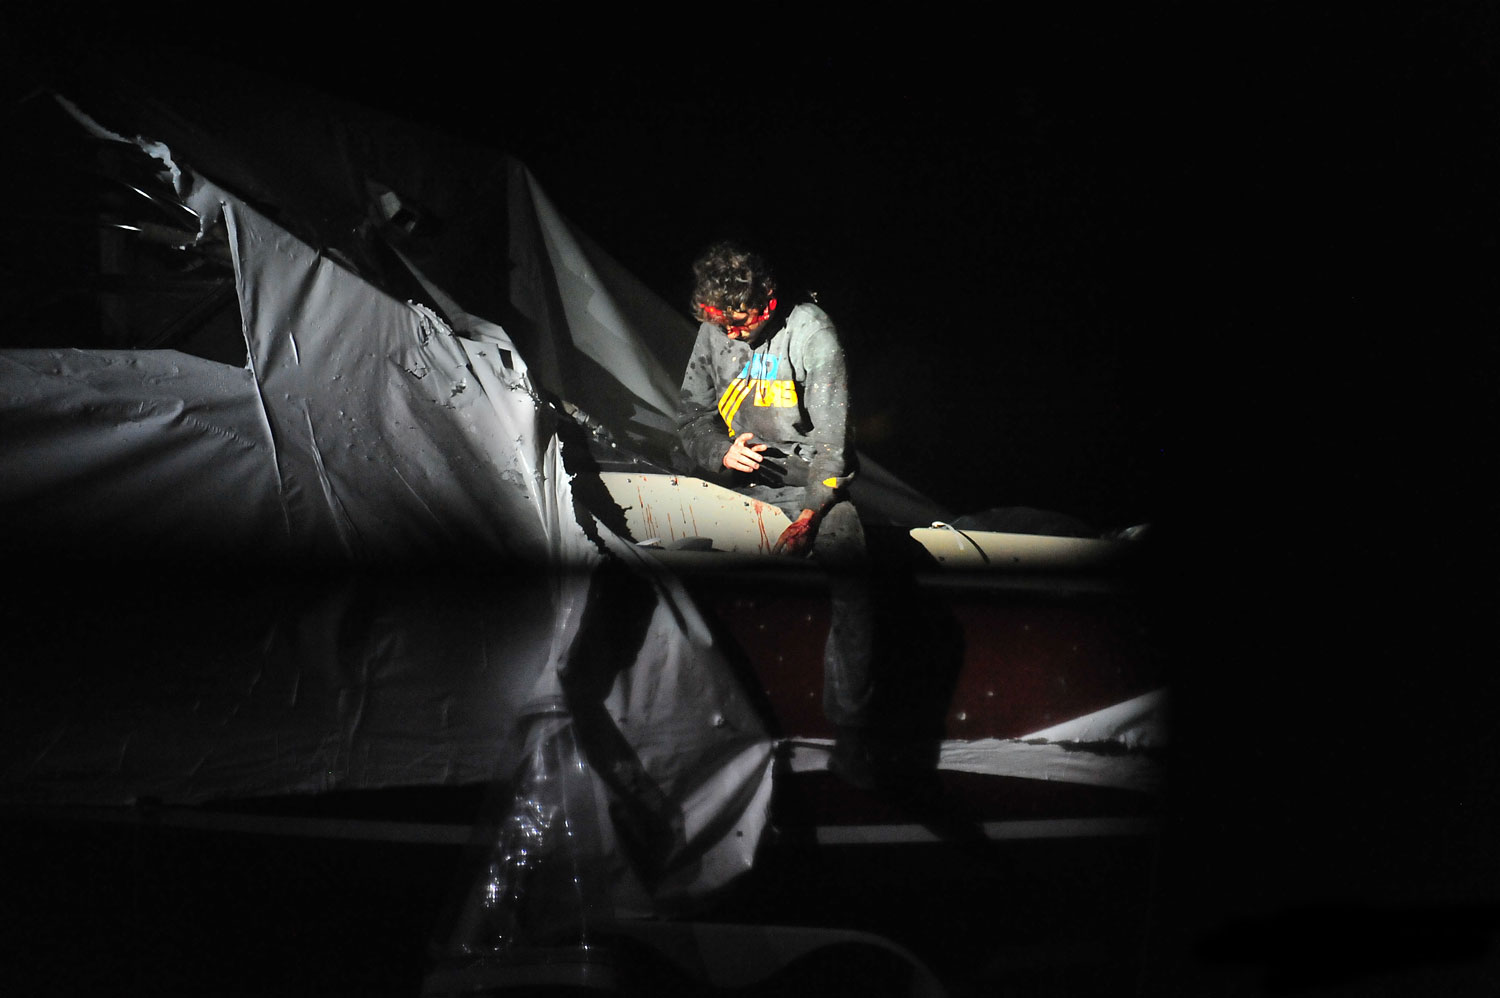 7:33:54 p.m. Tsarnaev begins to step out of the boat.